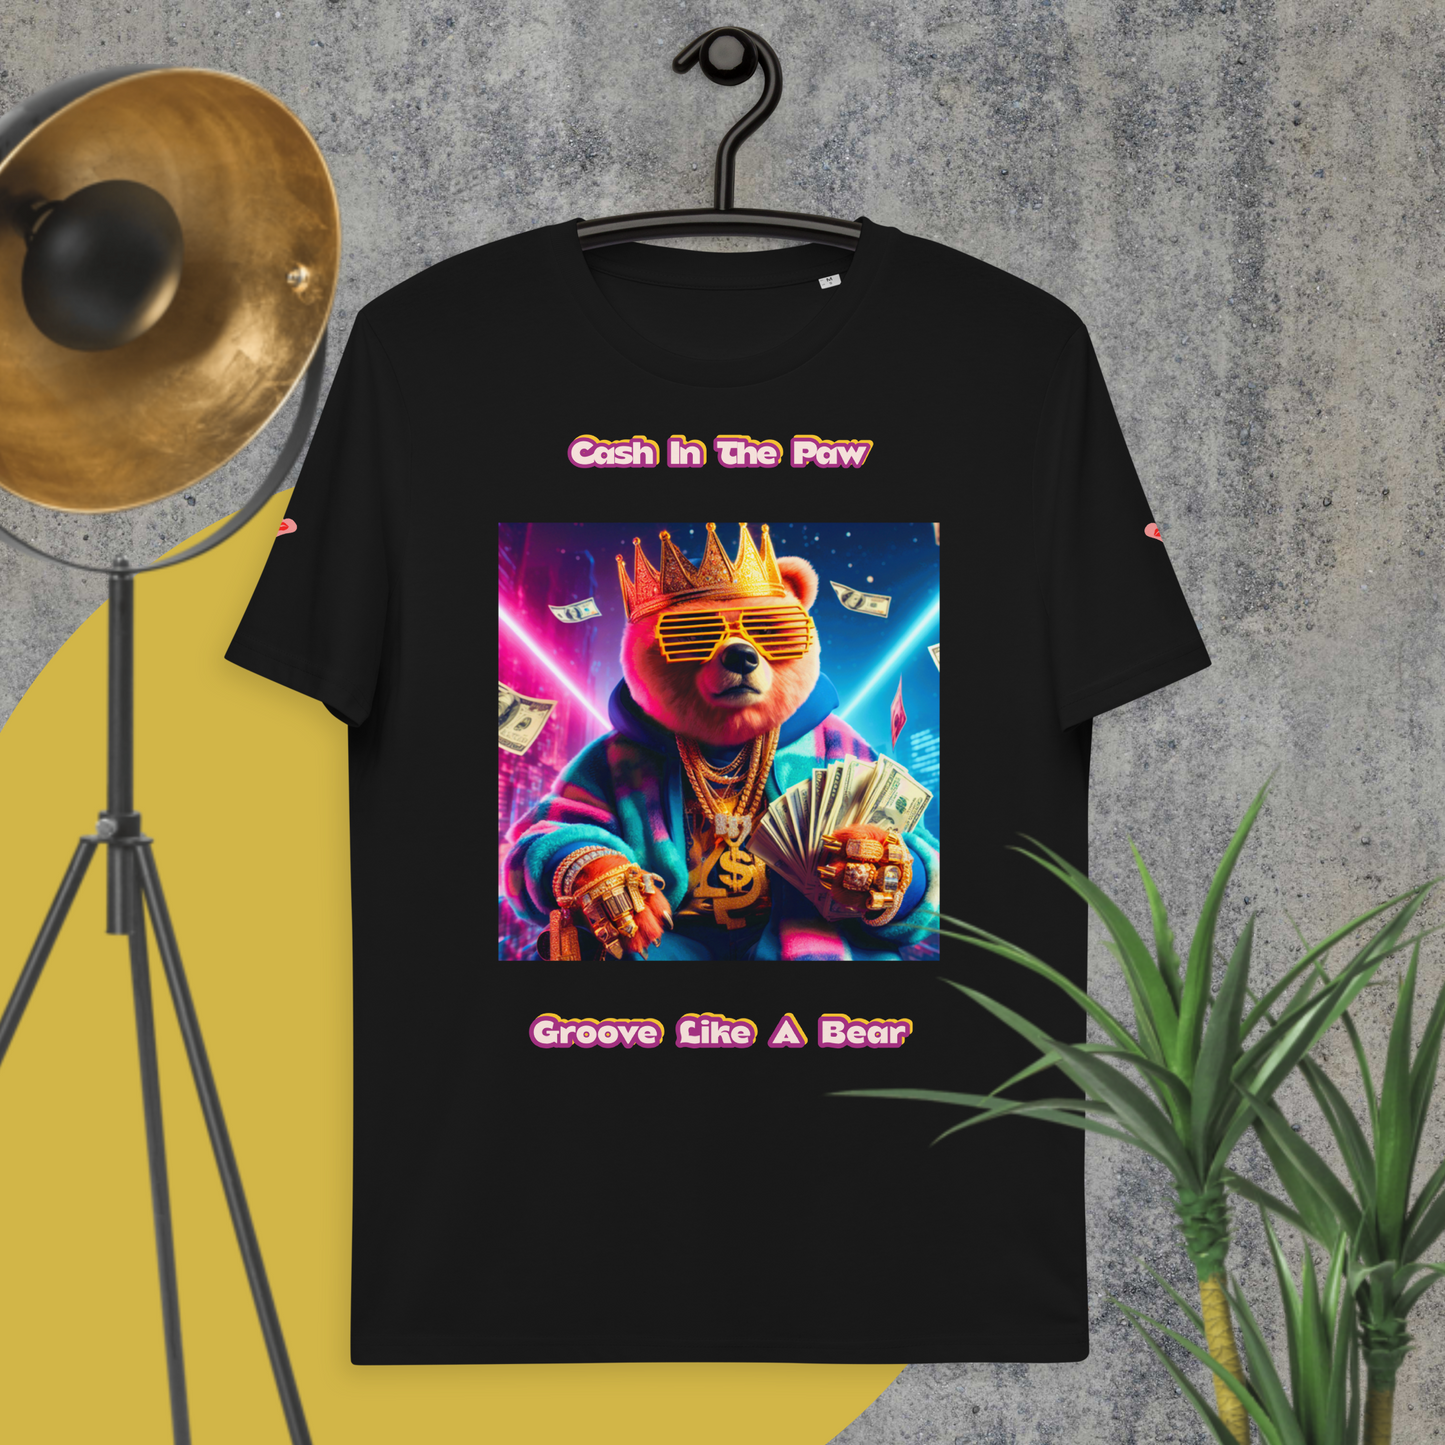 💕Groove Like a Bear🐻 Cash in the Paw💵🐾 Unisex organic cotton t-shirt👕